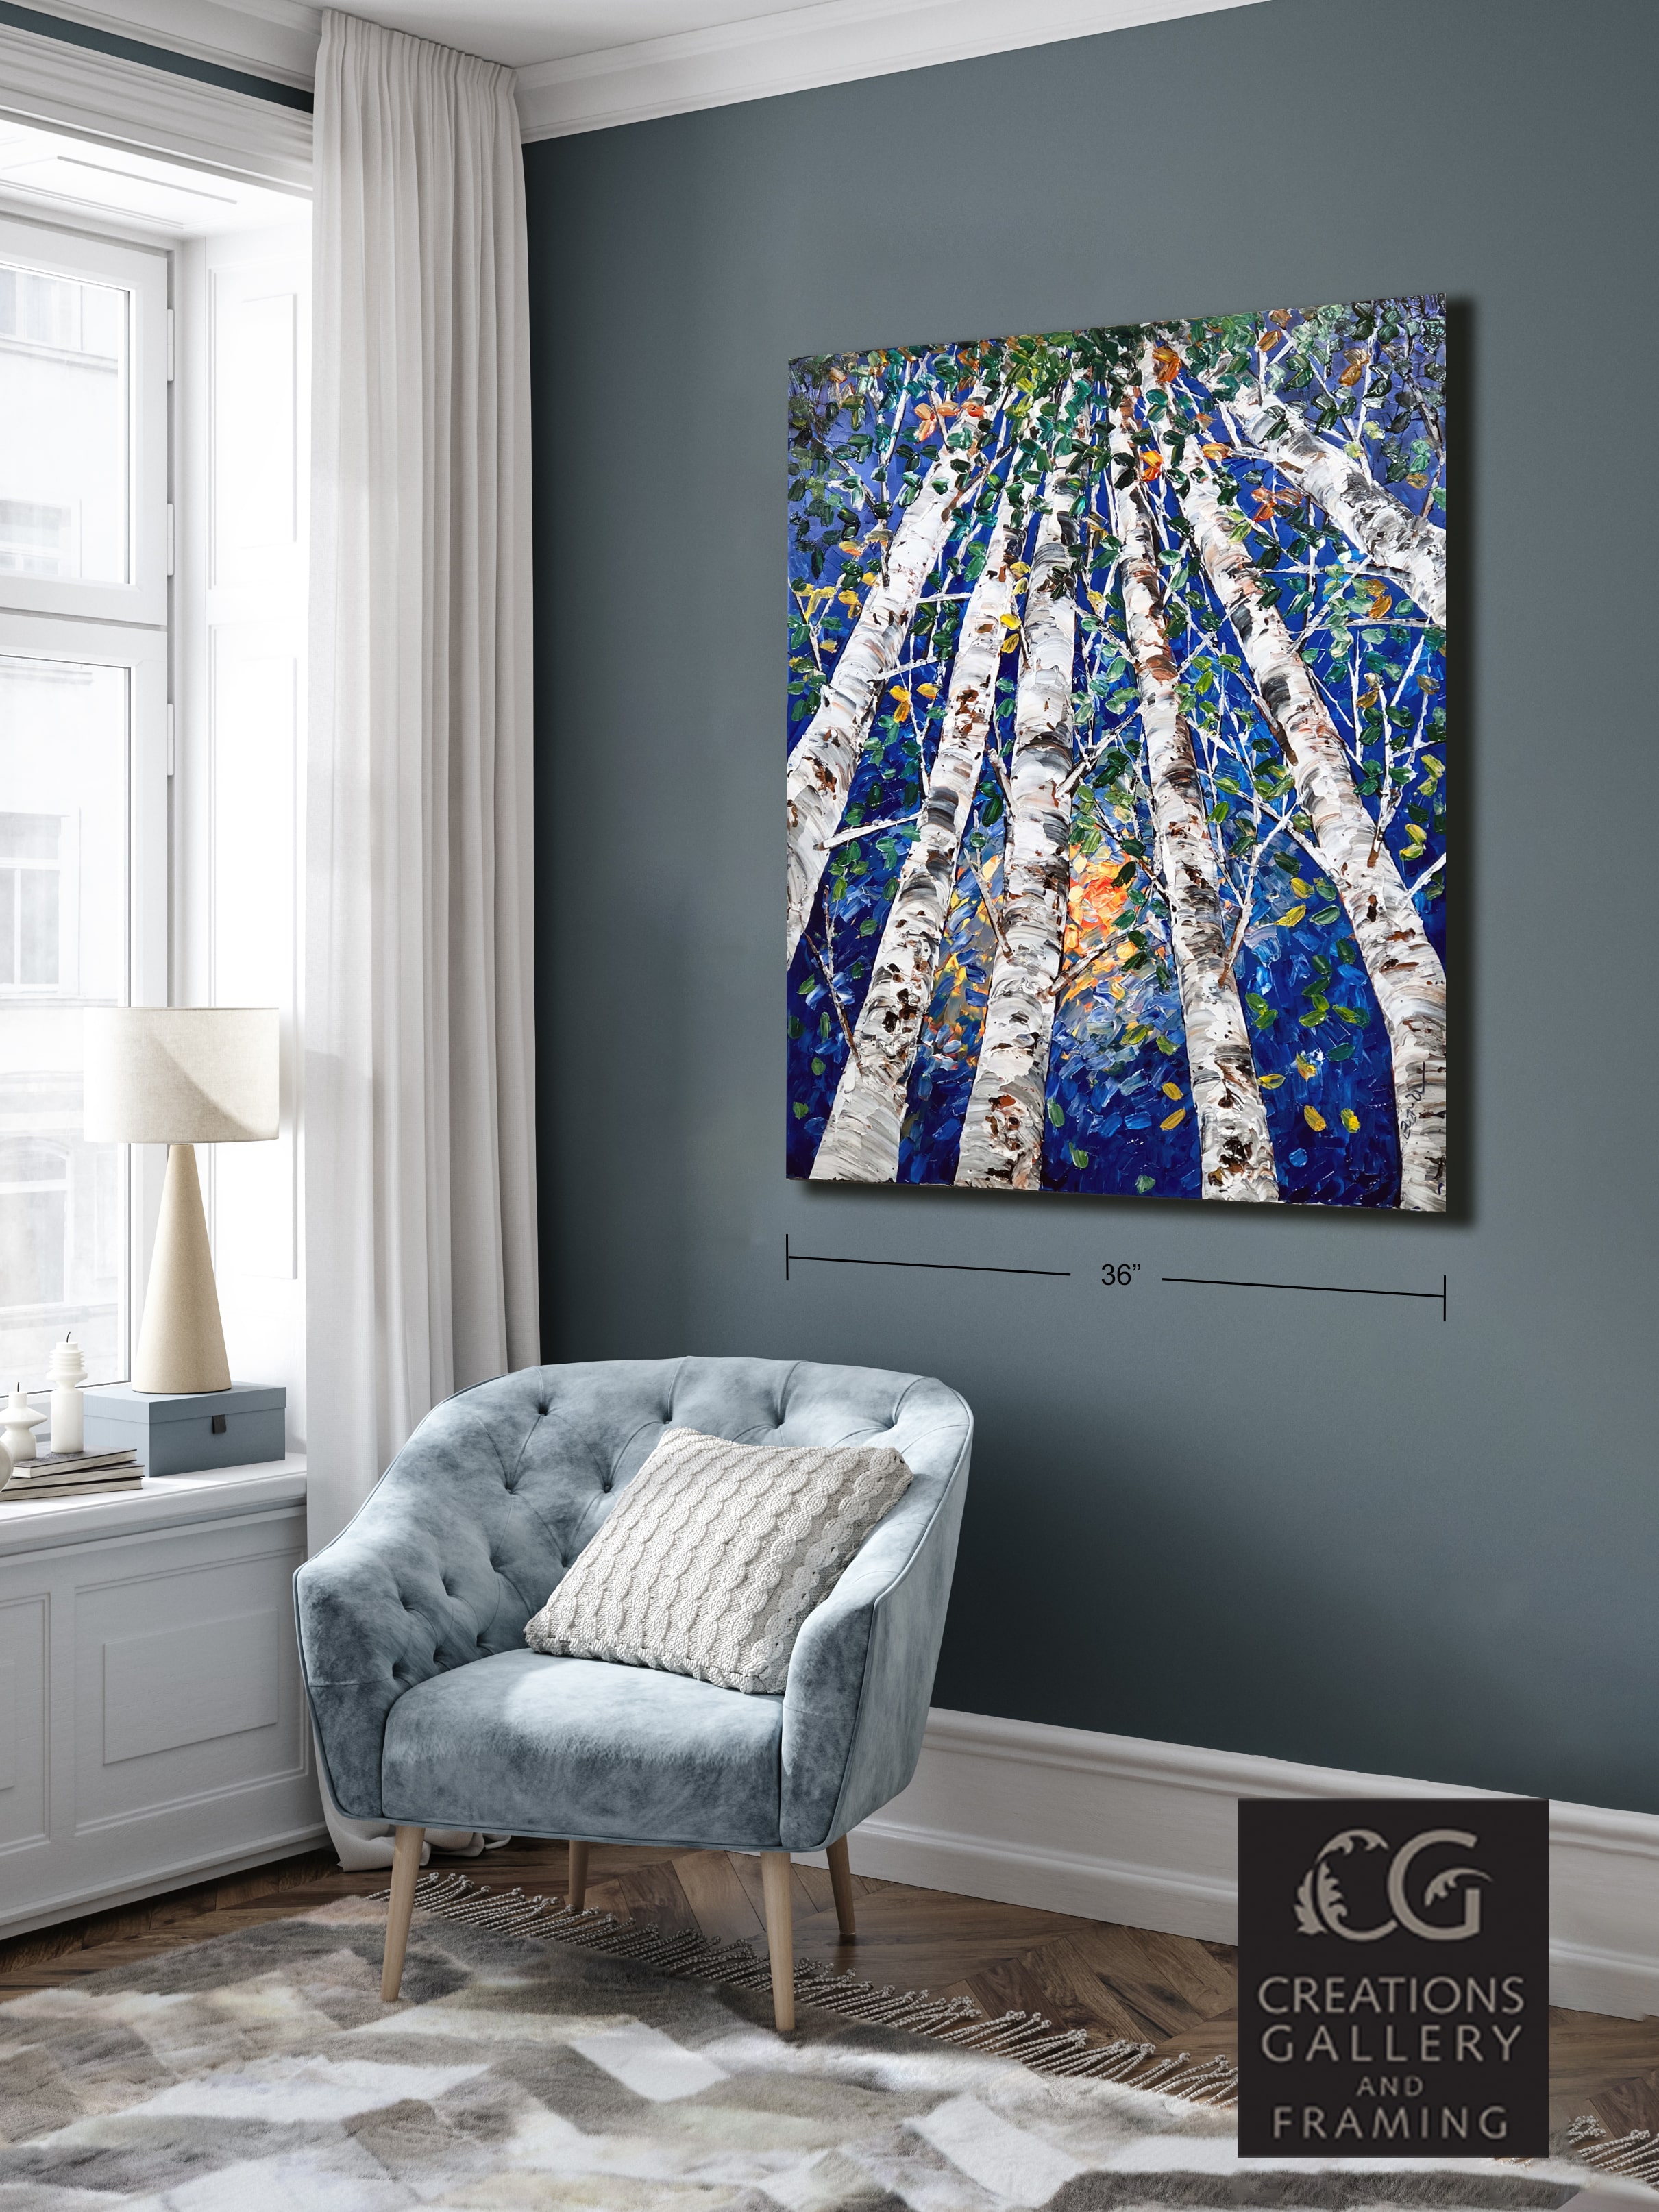 Maya Eventov Birch Looking Up Forests Glow 2 48x36 Room View 858